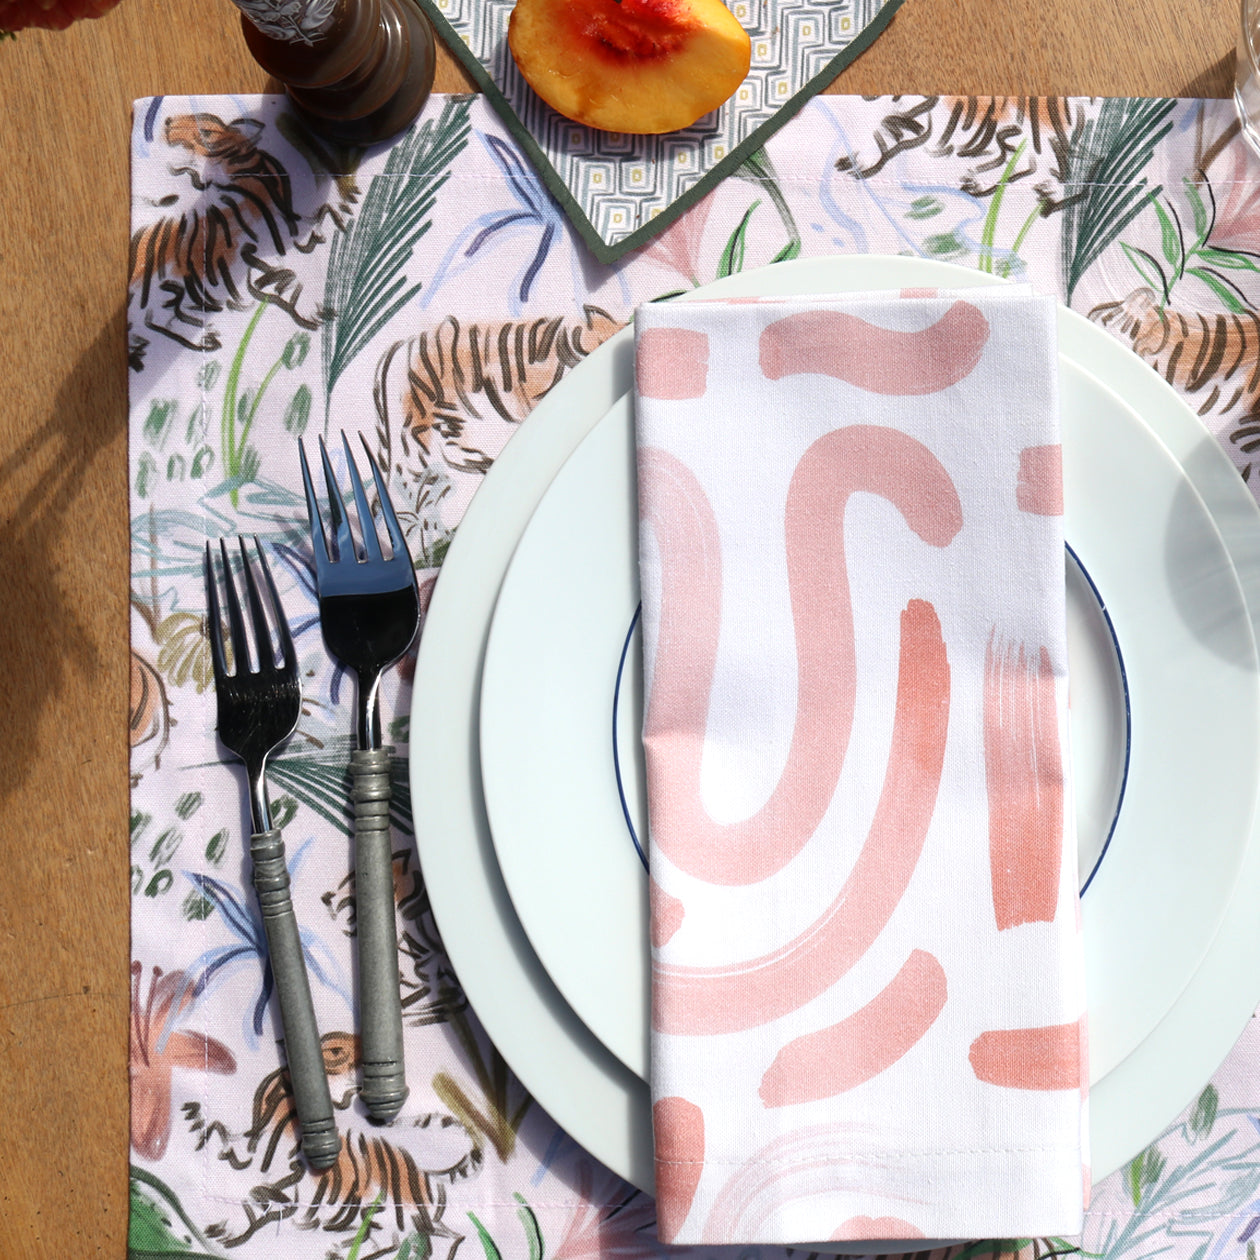 Close-up of table setting styled with Pink Chinoiserie Tiger Printed Placemat under two white plates with Pink Graphic Printed Napkin on top by silverware 